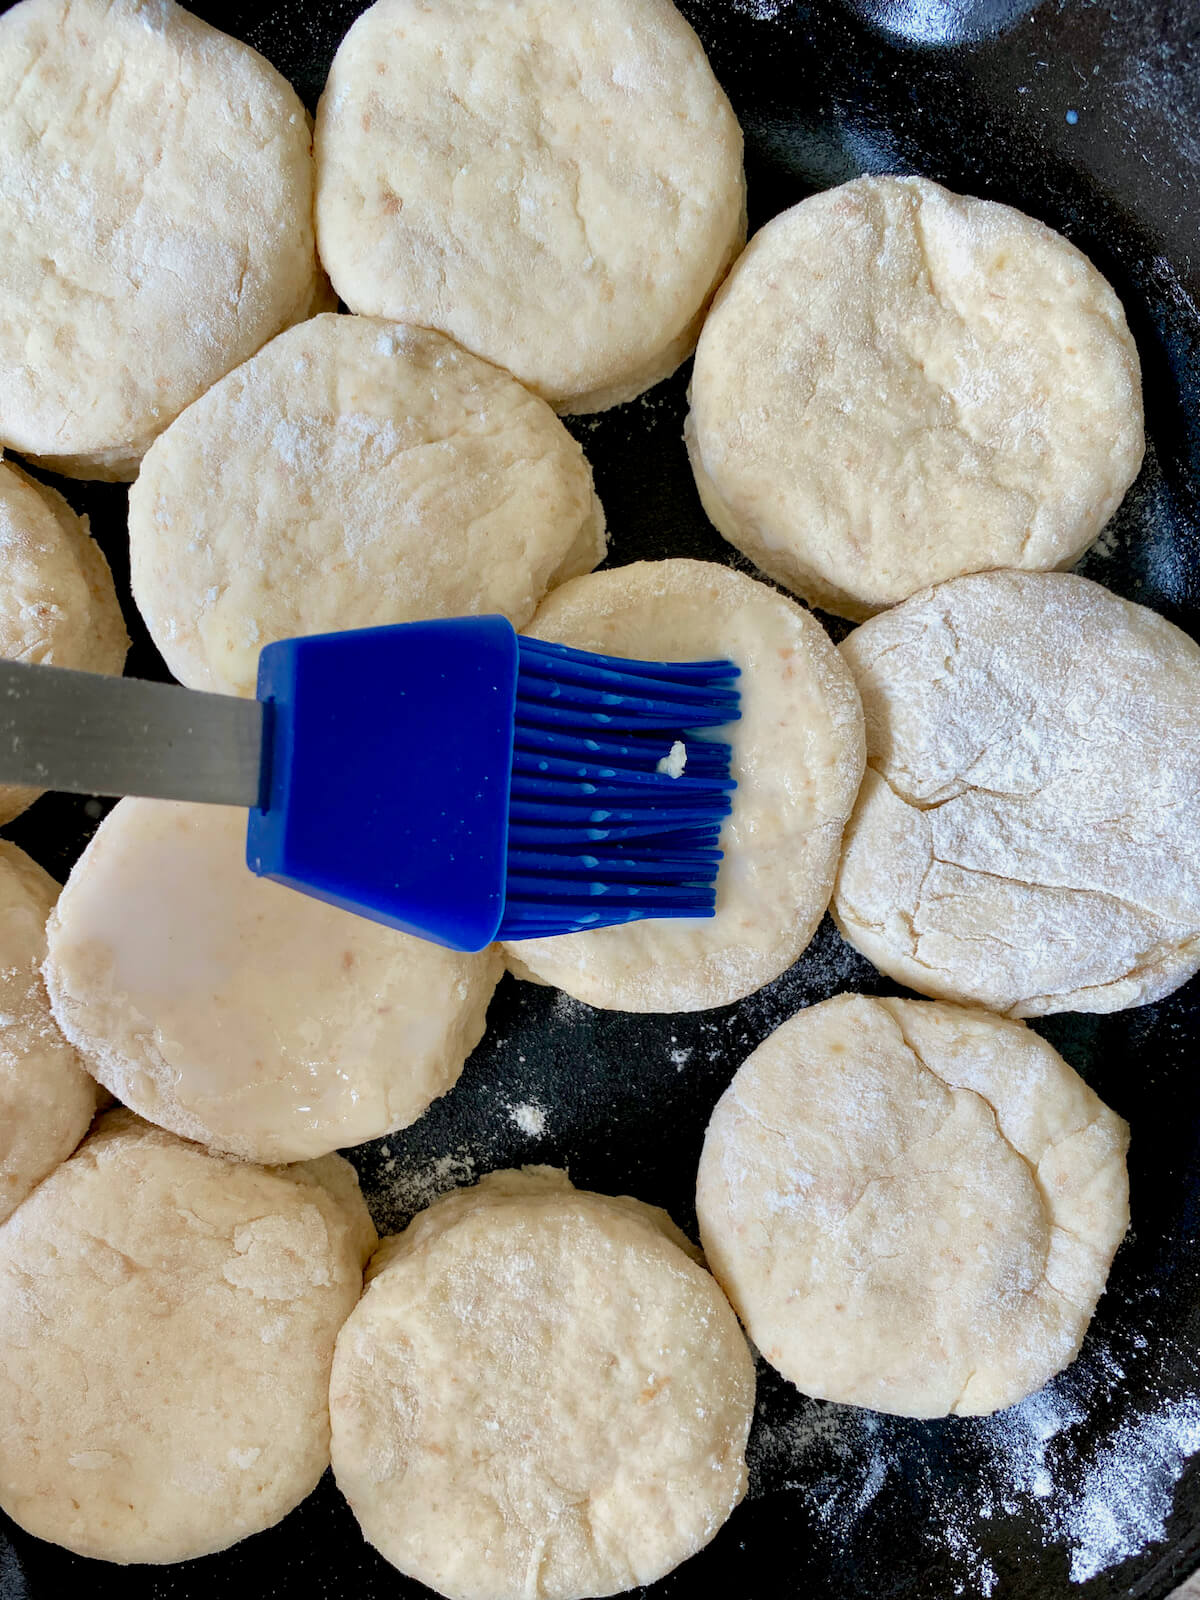 A blue silicone brush brushing buttermilk onto the raw biscuits in the cast iron skillet.